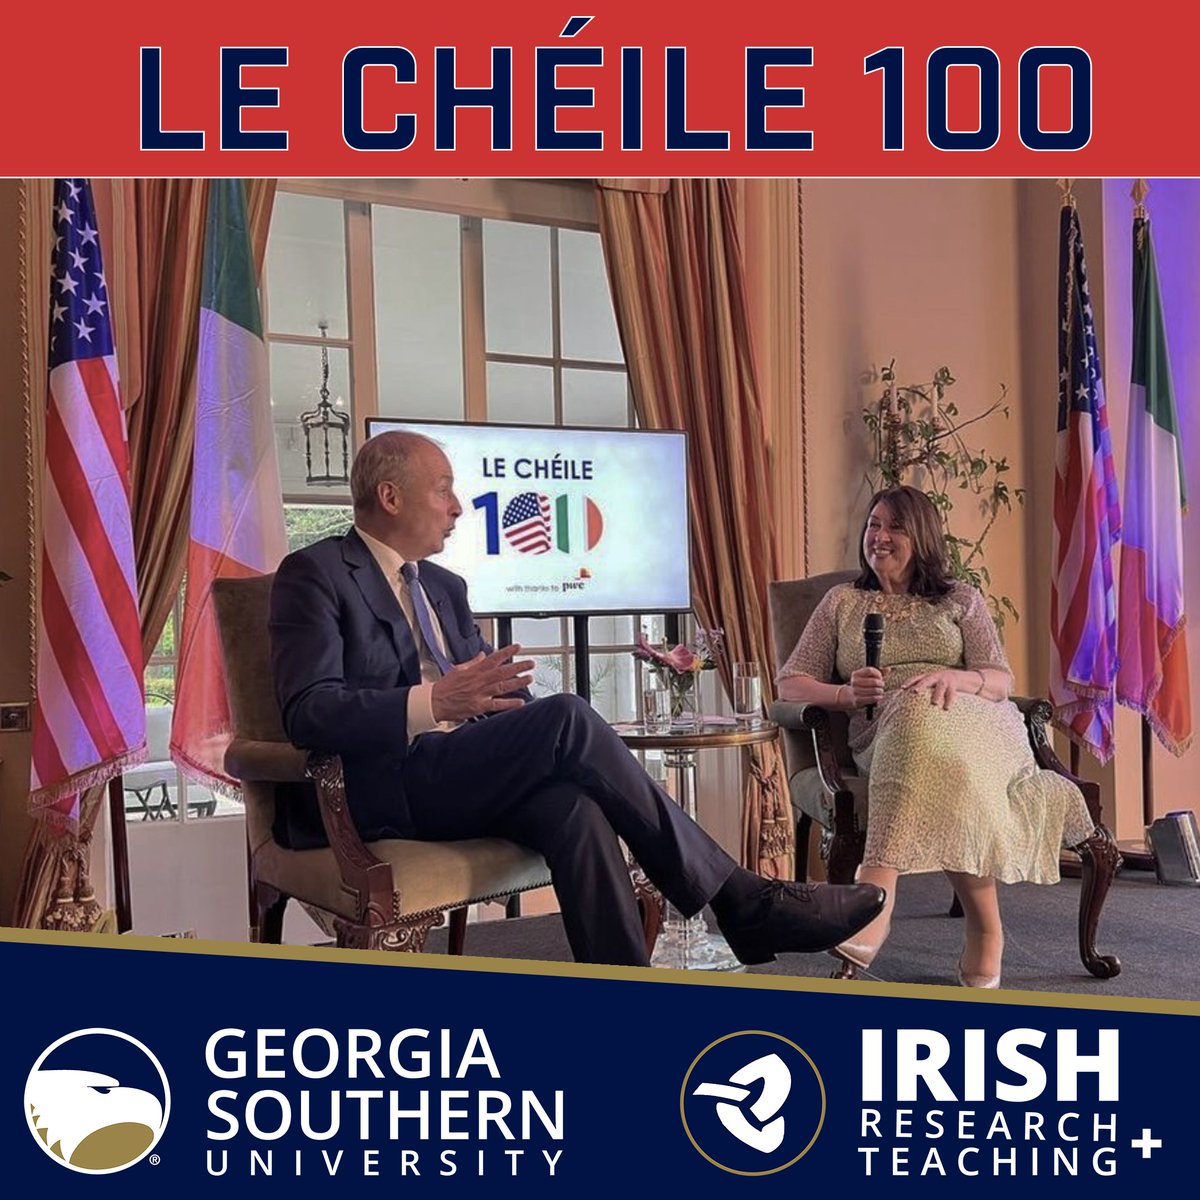 Thrilled to represent @GeorgiaSouthern at a fireside chat between @USAmbIreland Claire Cronin and Ireland's Foreign Affairs Minister @MichealMartinTD. At her official Dublin residence, the Ambassador hosted a candid, constructive conversation as part of the #LeChéile100 series.